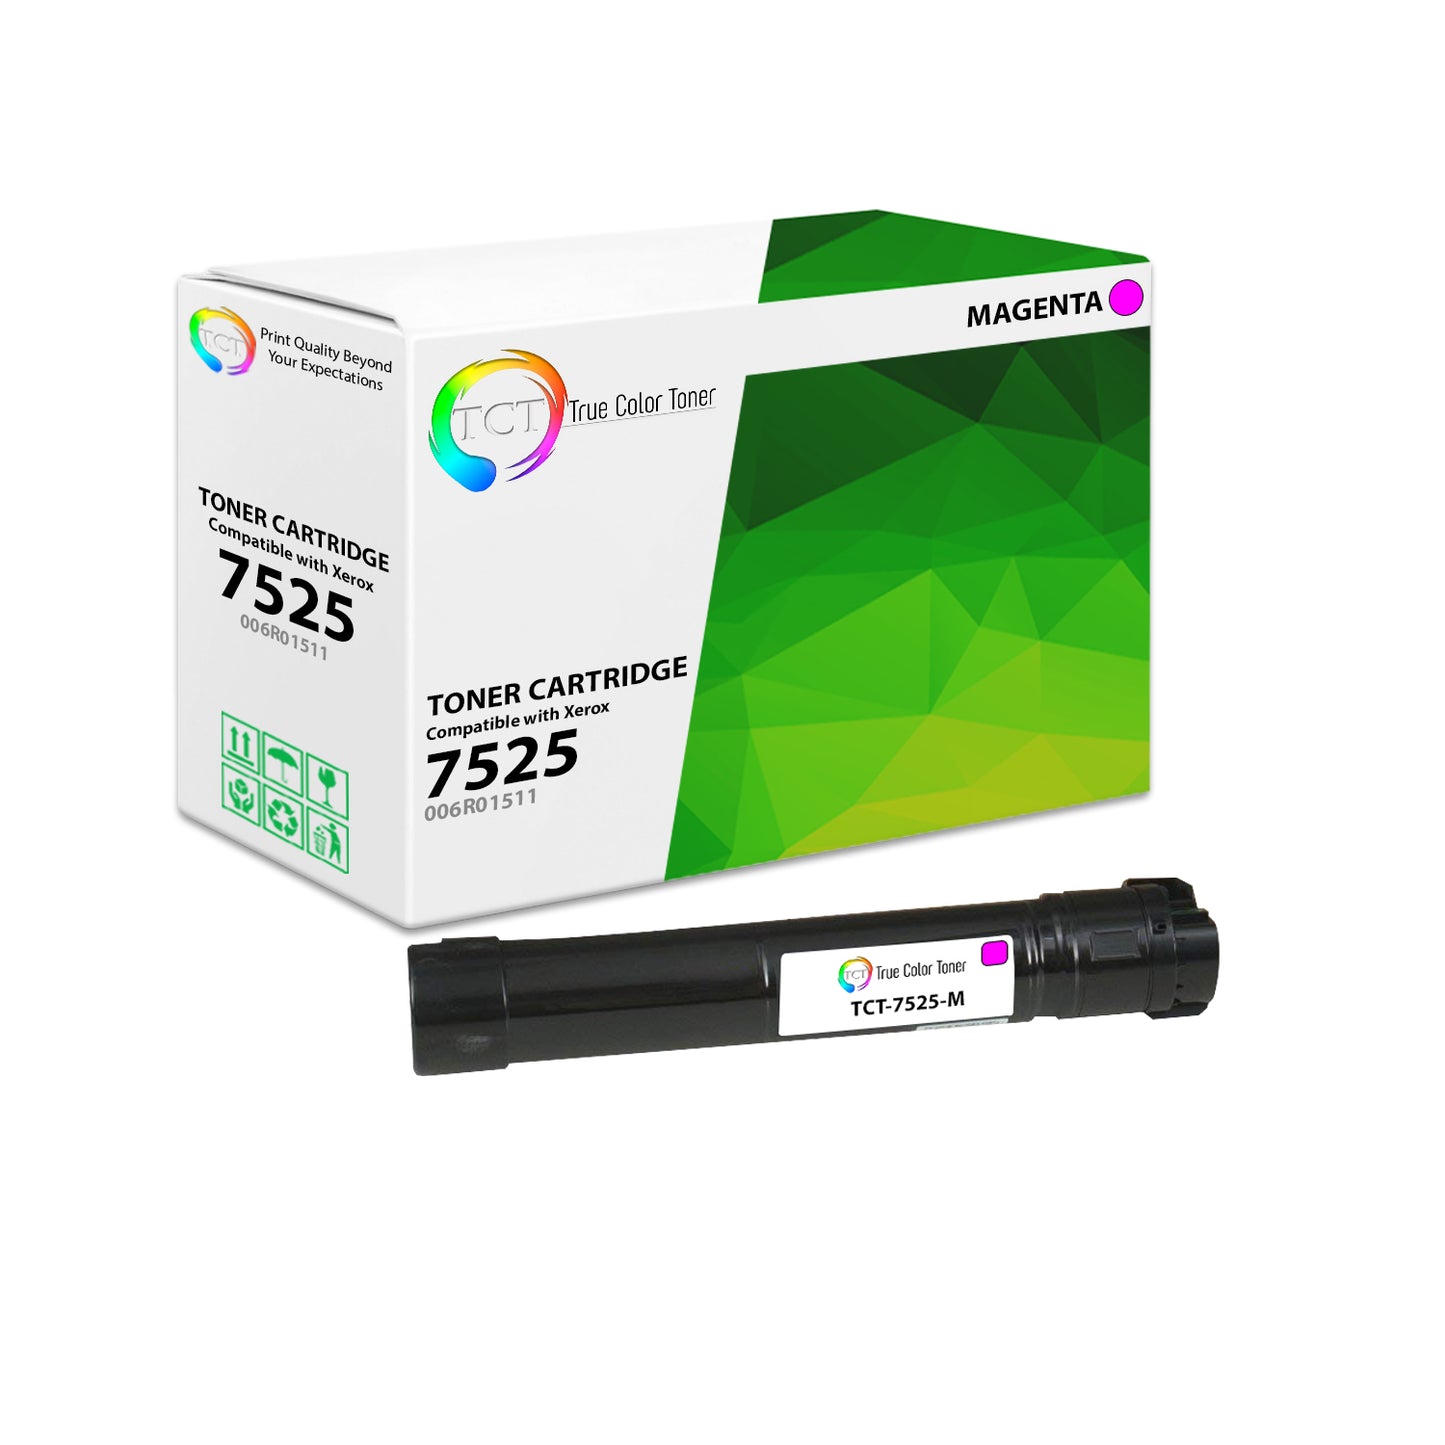 TCT Compatible Toner Cartridge Replacement for the Xerox 7525 Series - 1 Pack Magenta